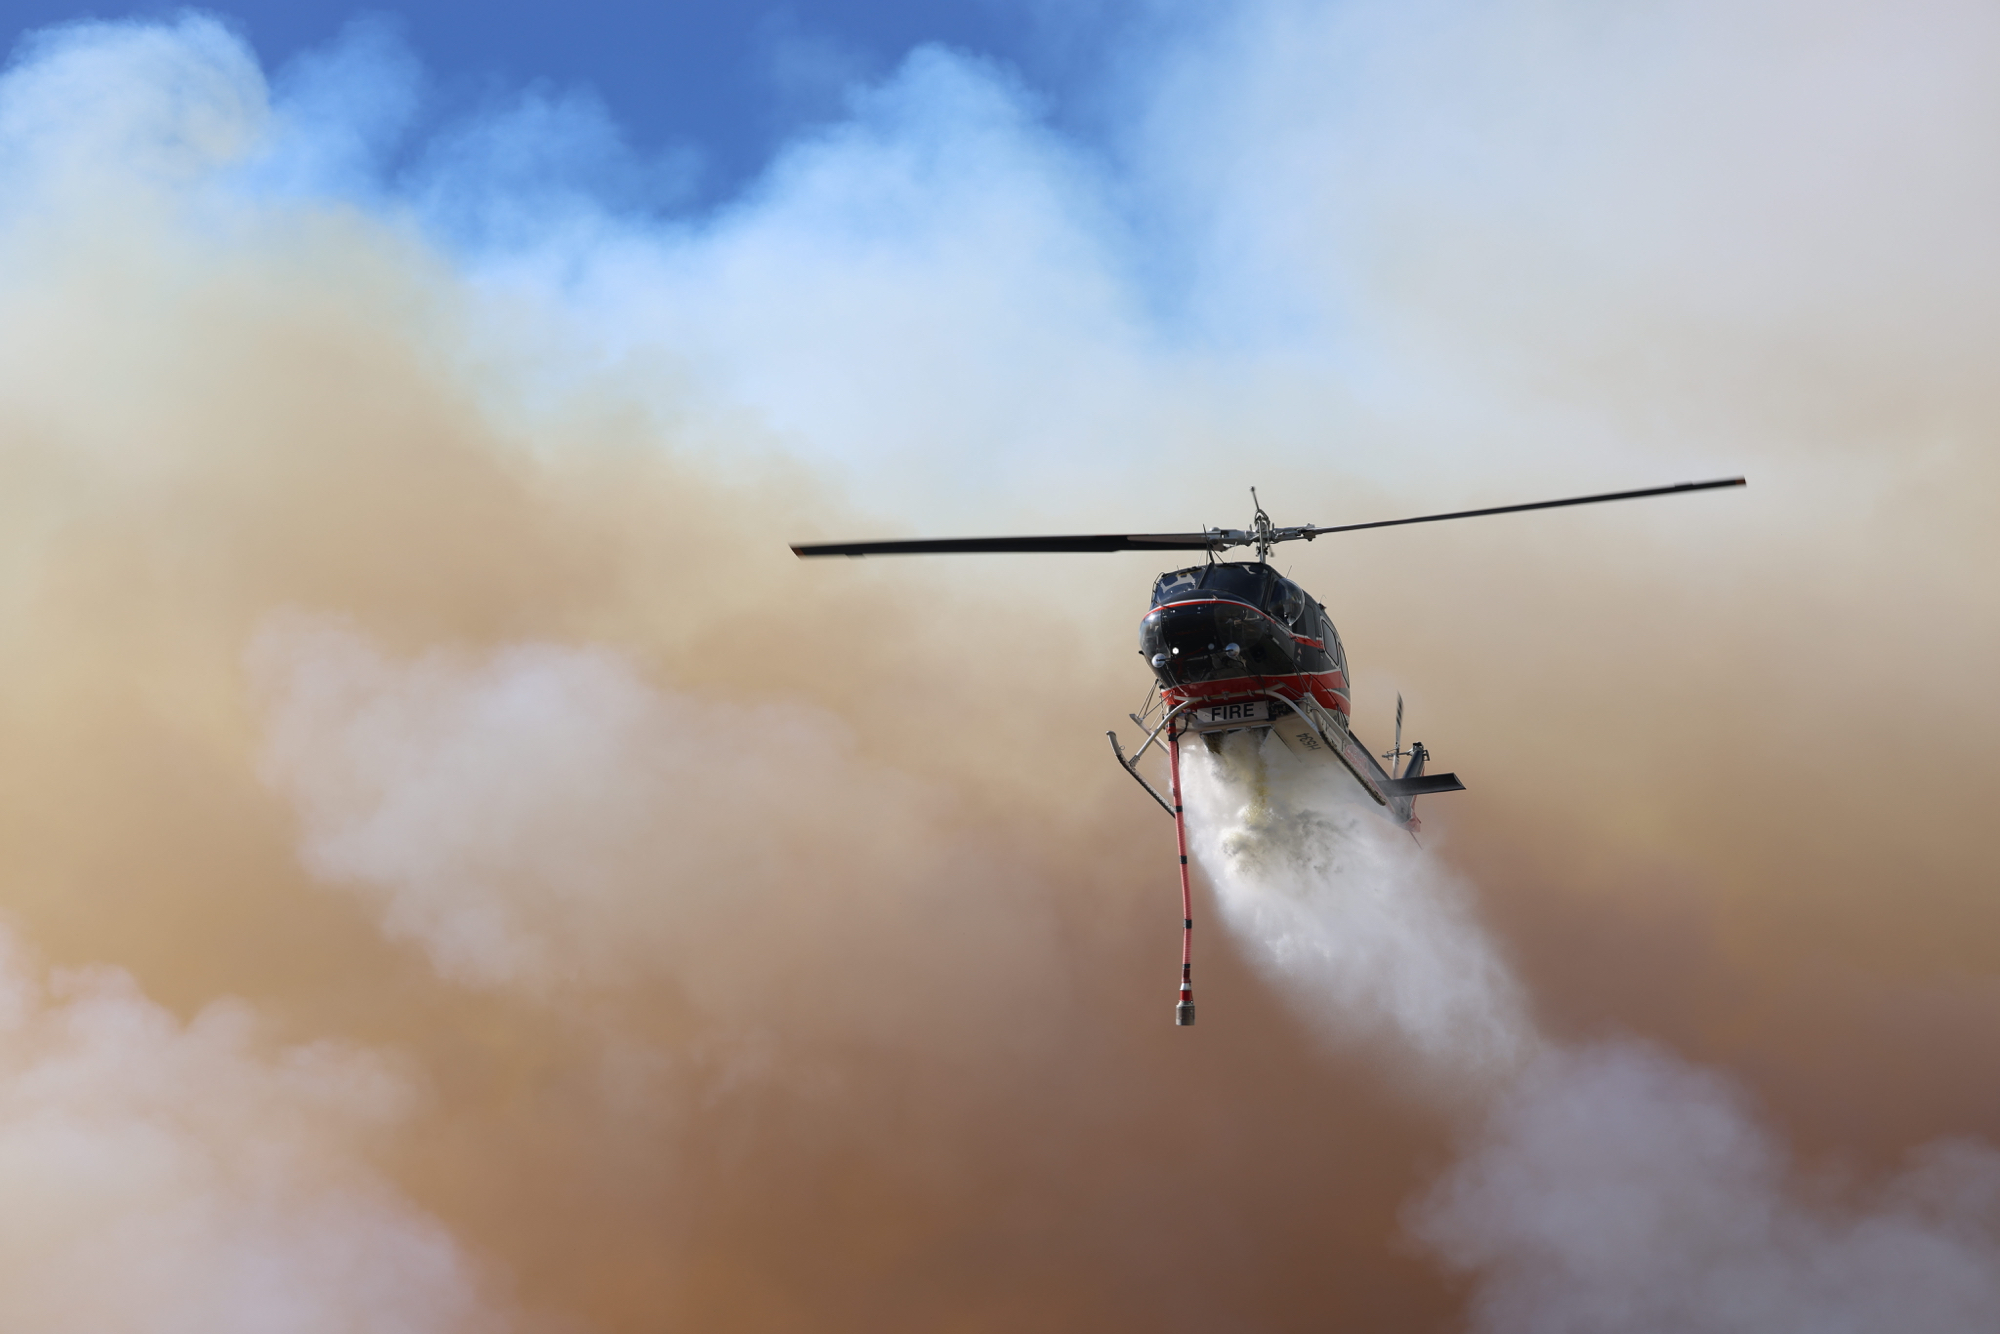 PHOTO: Firefighters are battling a brush fire that broke out in Hesperia Monday afternoon, June 6, 2022, in the area of Highway 173 and Highway 138 in Hesperia California. 